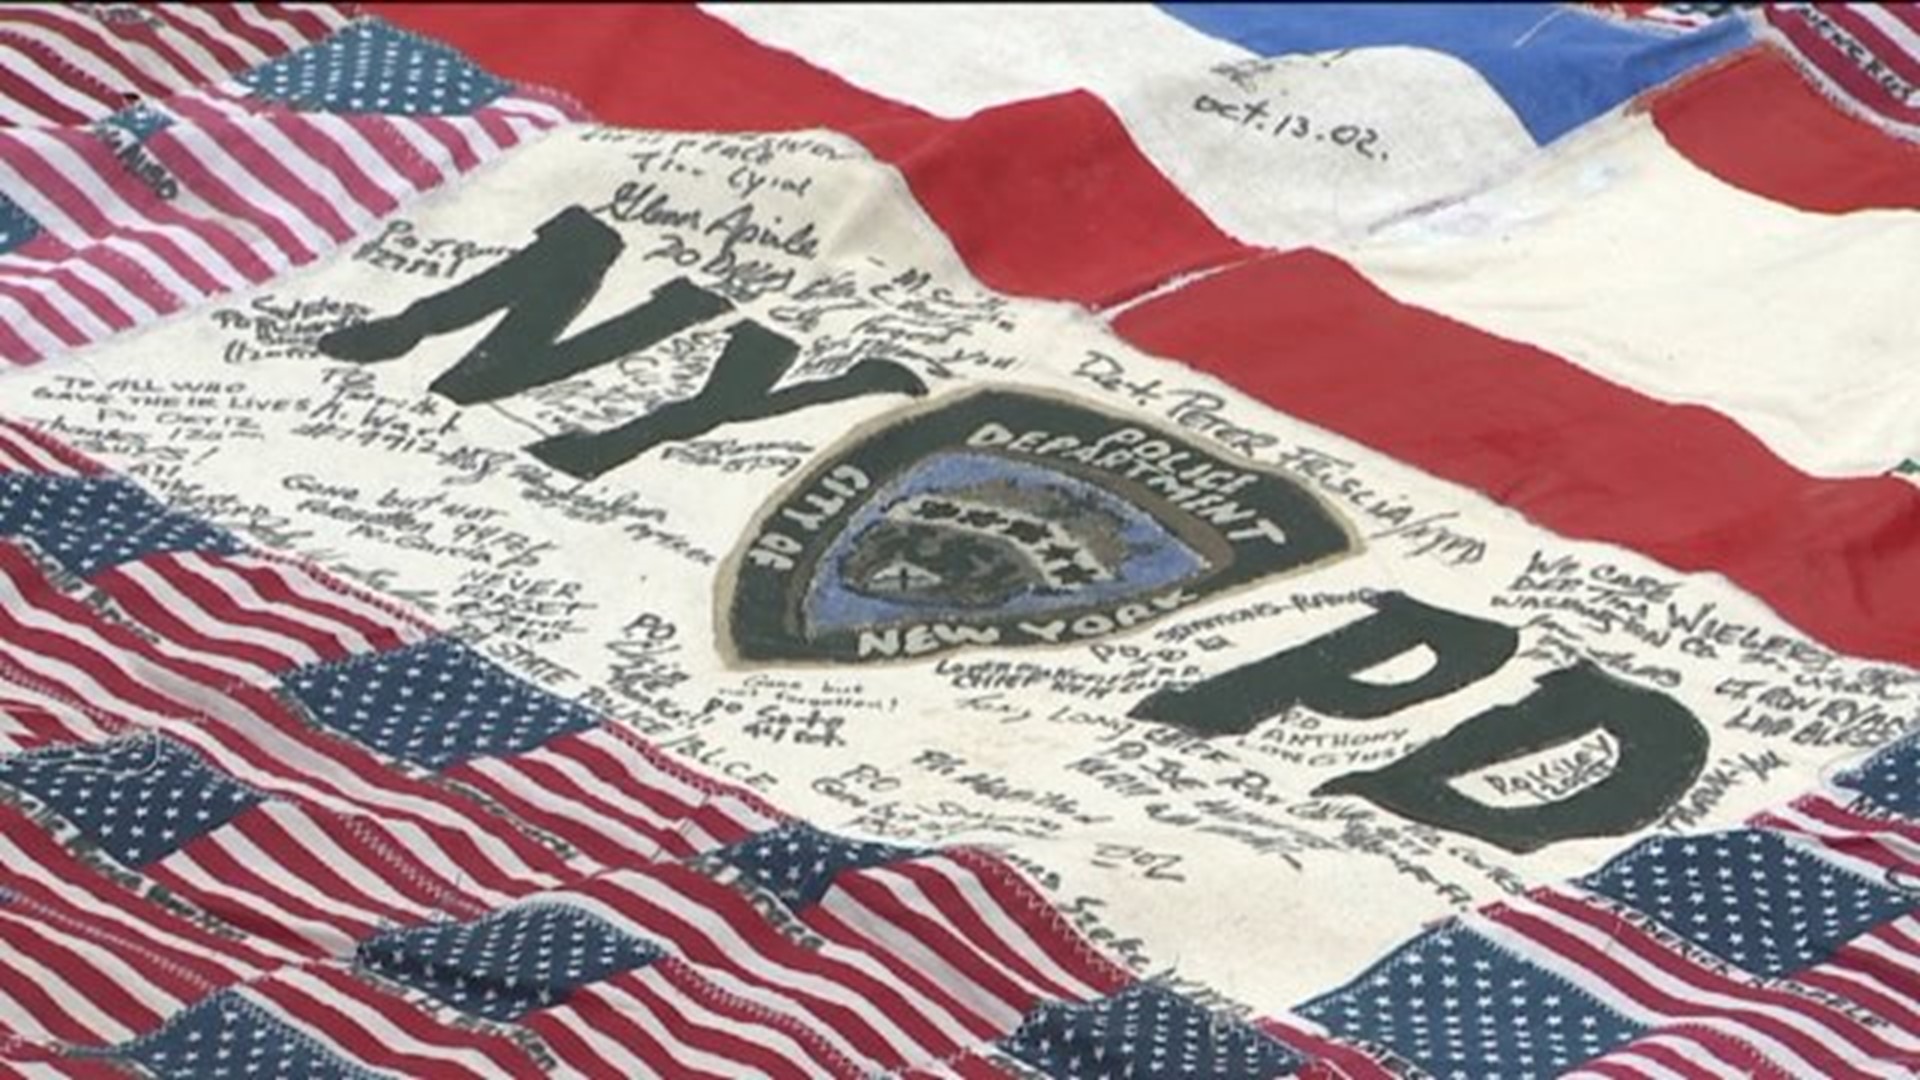 9/11 Memorial Flag on Display in Carbon County